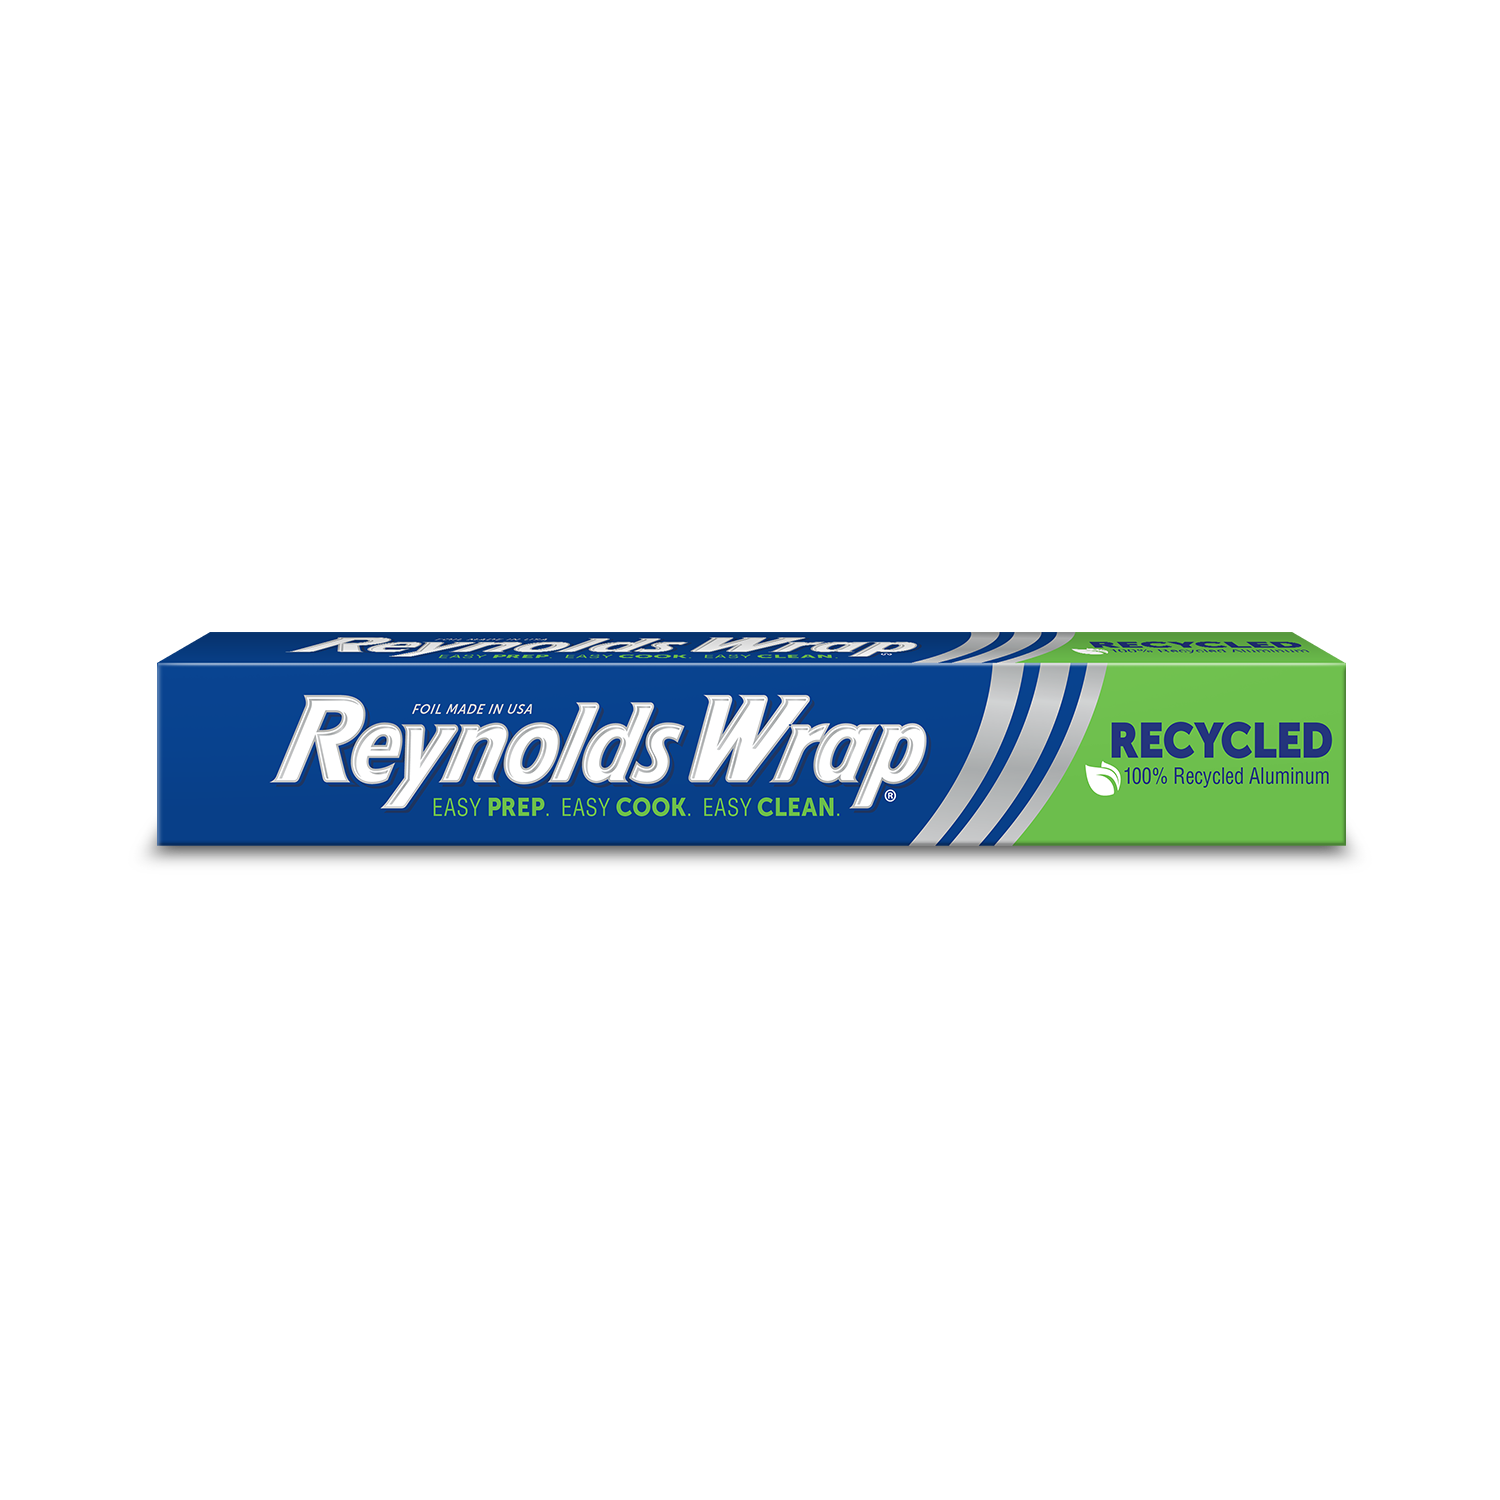 https://www.reynoldsbrands.com/sites/default/files/products/heroes/08_RW_Foil_Recycled_2021_1.png